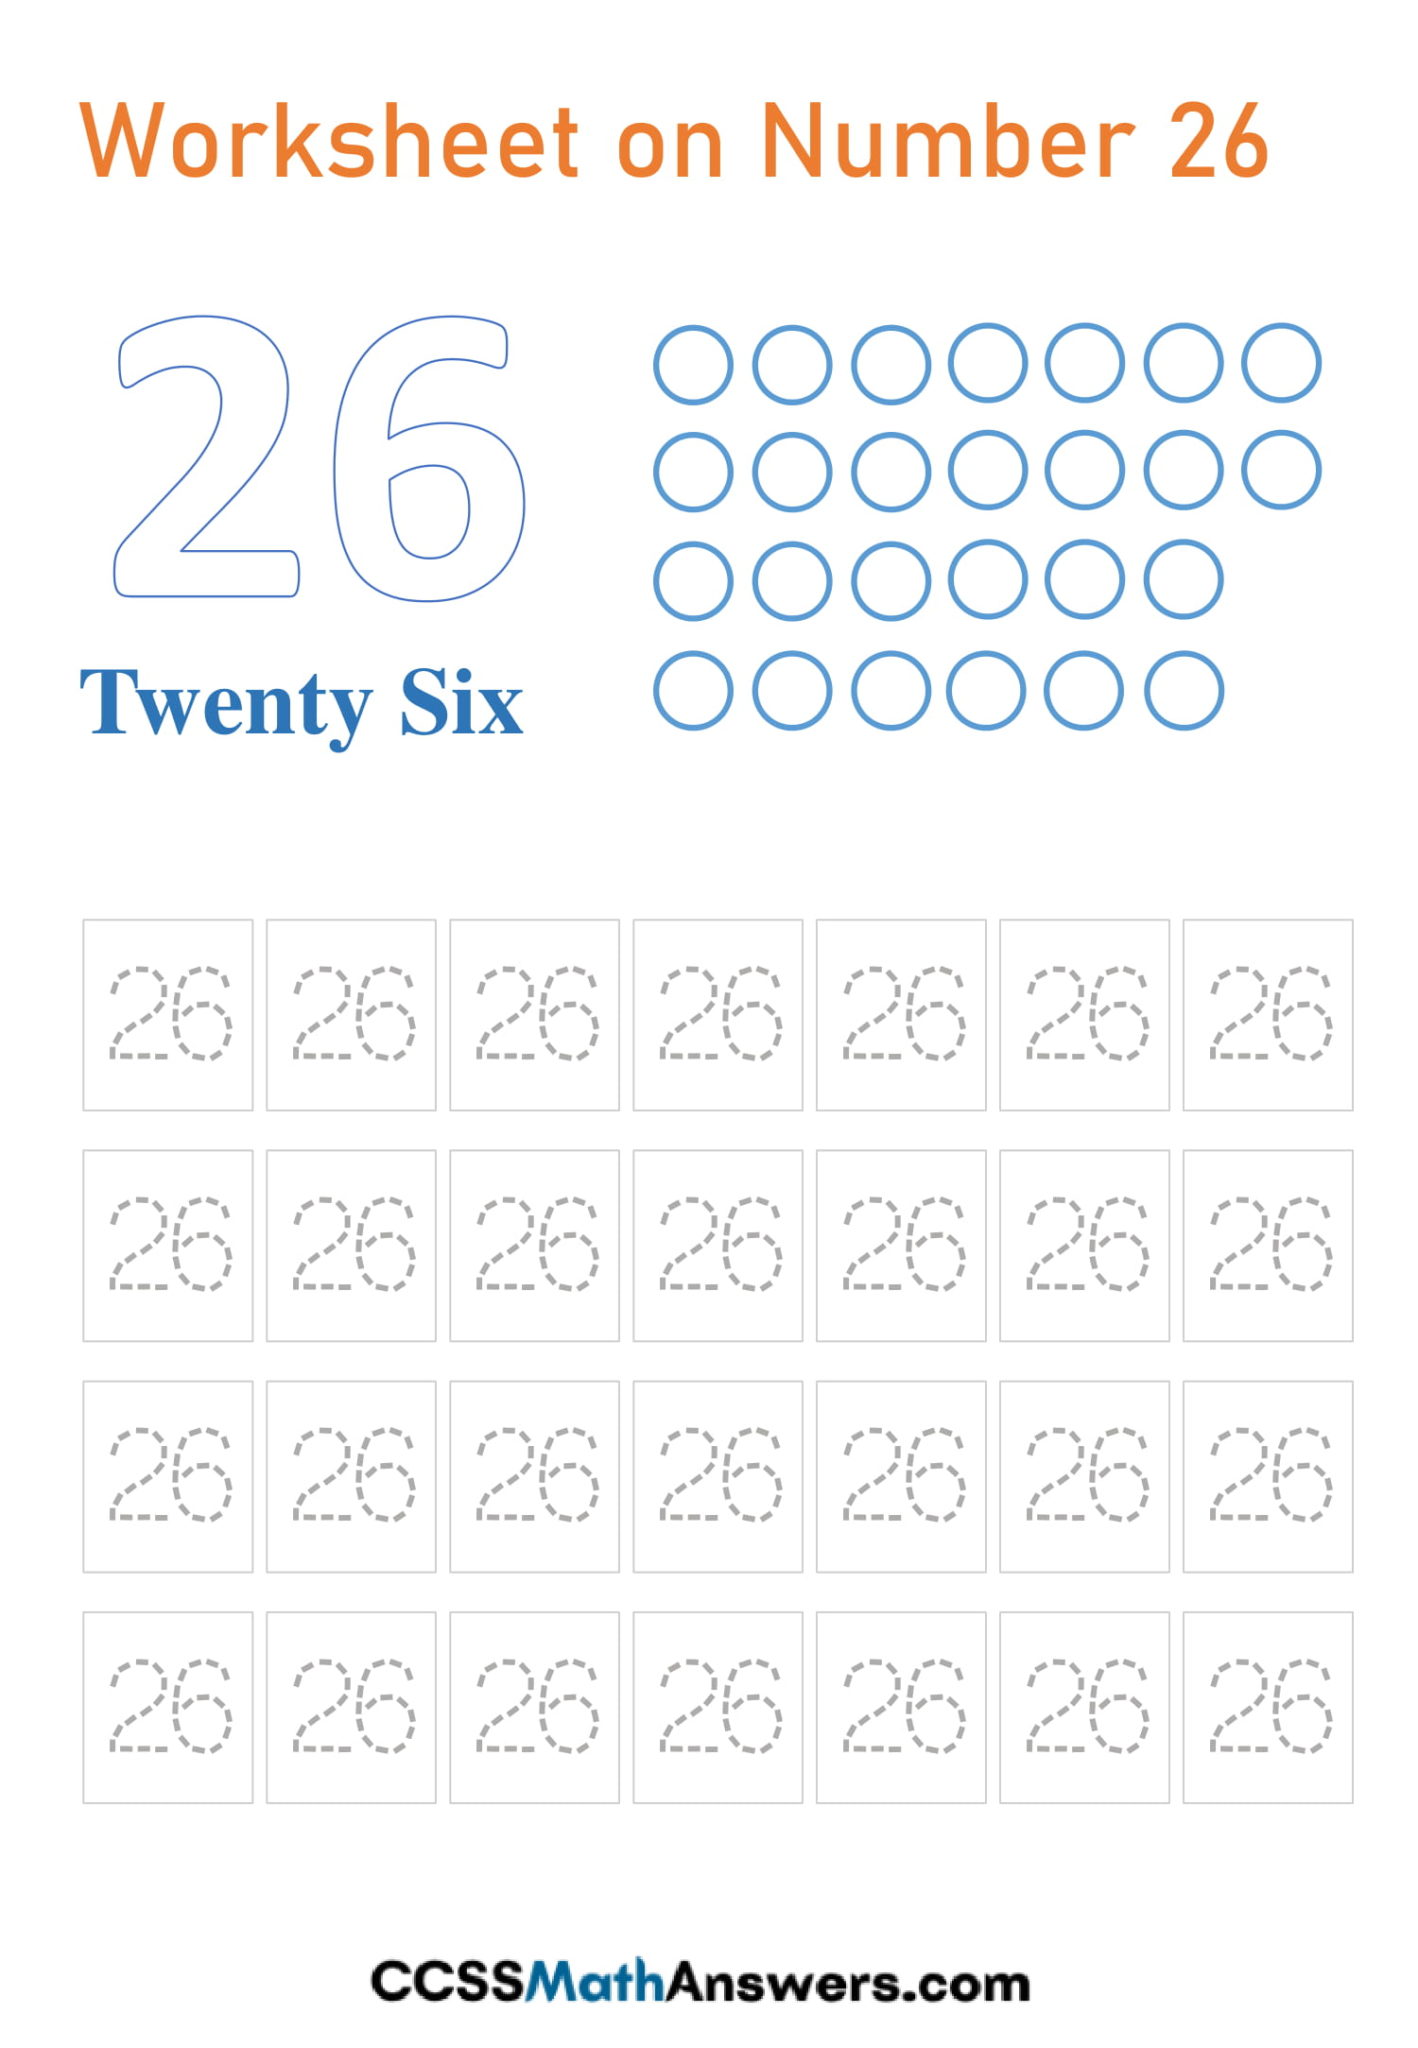 worksheet-on-number-26-for-kindergarten-free-printable-number-26-writing-counting-tracing